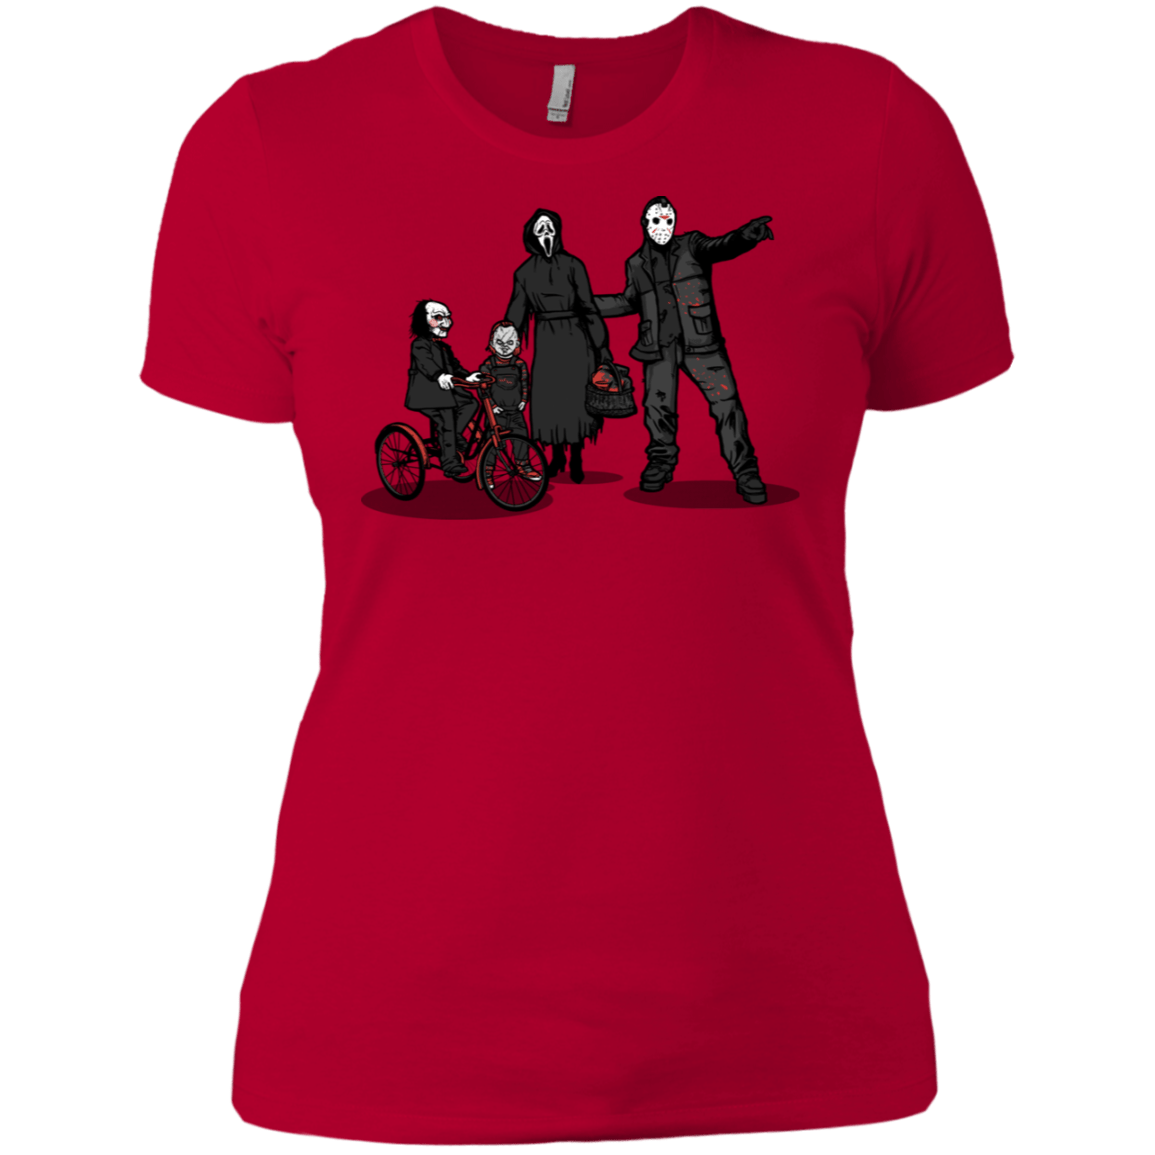 T-Shirts Red / X-Small Family Values Women's Premium T-Shirt